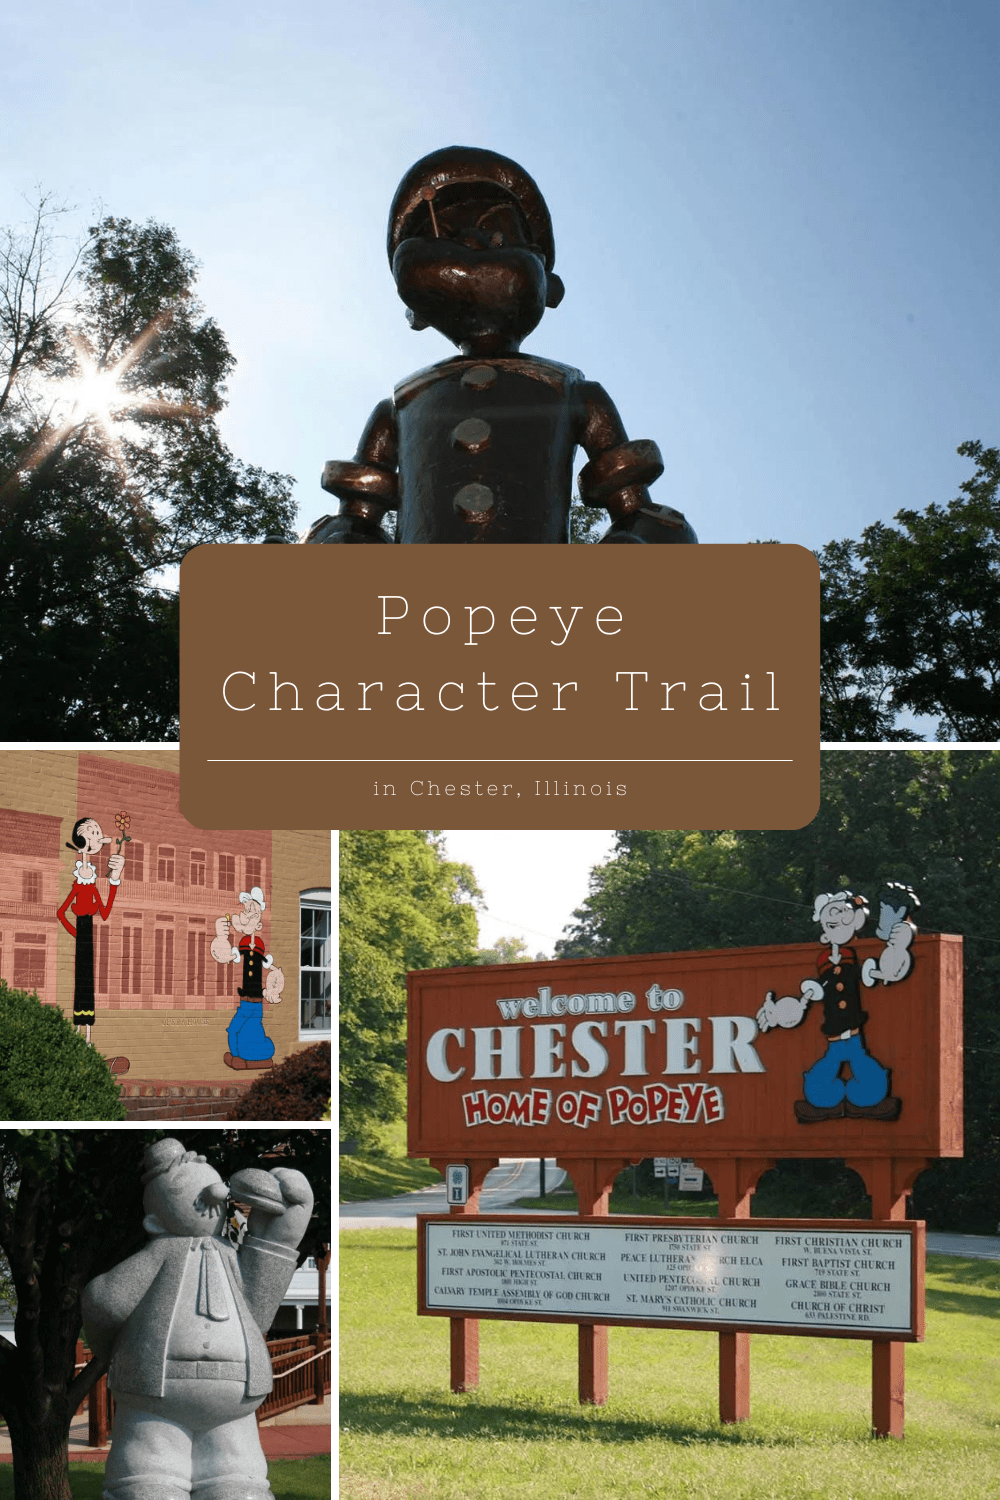 Chester, Illinois is known as “The Home of Popeye.” The small Illinois town is the hometown of E.C. Segar (Elzie Crisler Segar) who created the popular comic book character, Popeye the Sailor Man. Today the town celebrates its status as “The Home of Popeye” with events, murals, cut-out photo ops, visitor centers and gift shops, and, most prominently, the Popeye Character Trail, with new statues of these famed cartoons popping up every year. #Popeye #RoadTrip #RoadsideAttractions